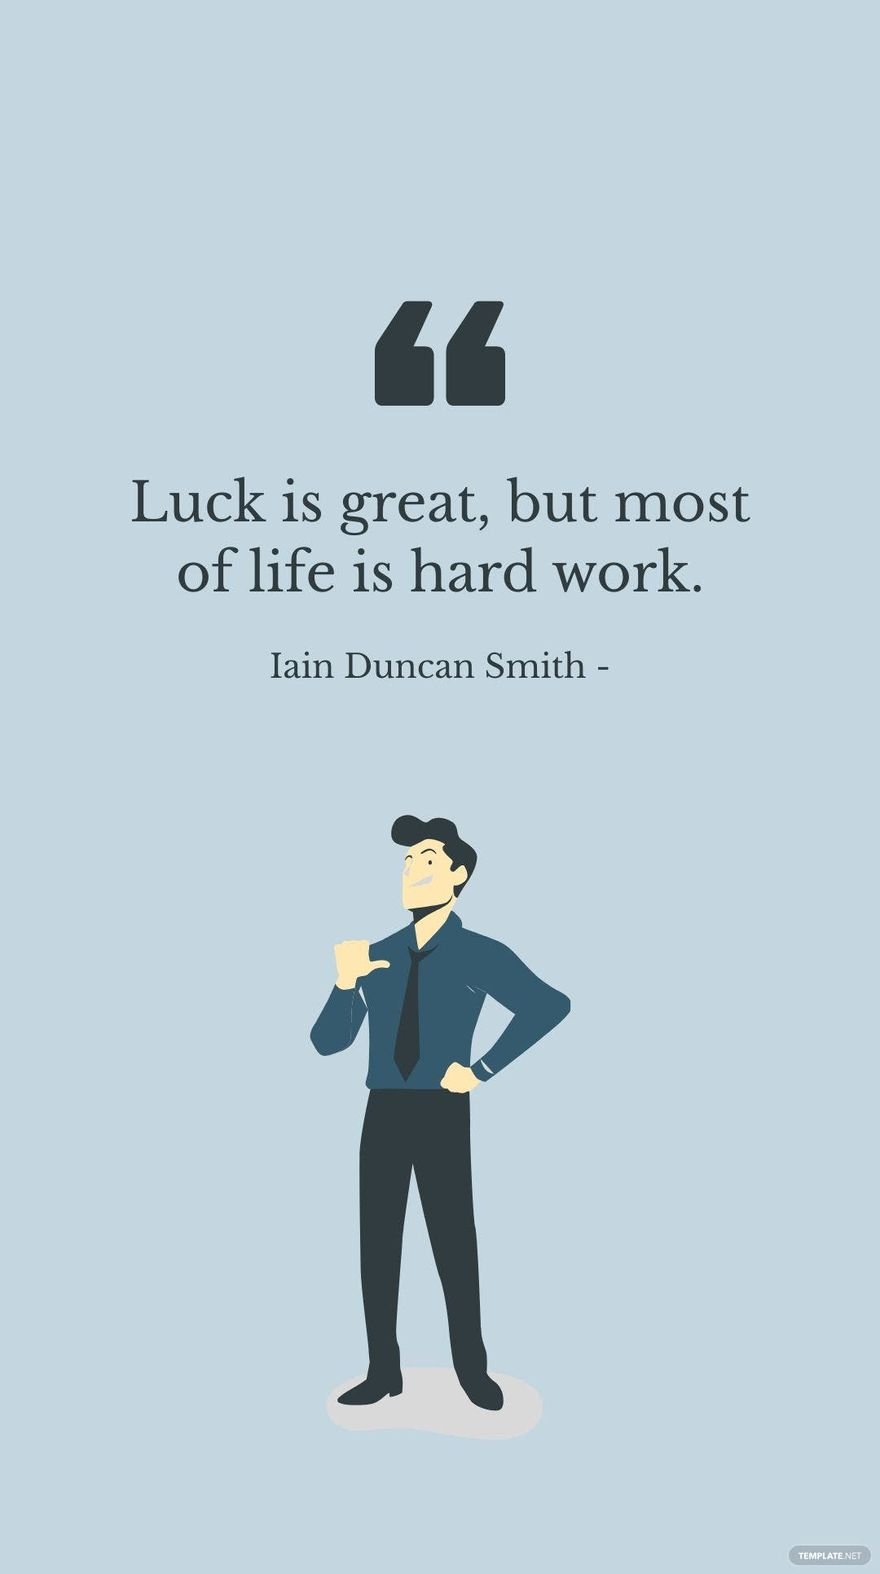 Iain Duncan Smith - Luck is great, but most of life is hard work. in JPG